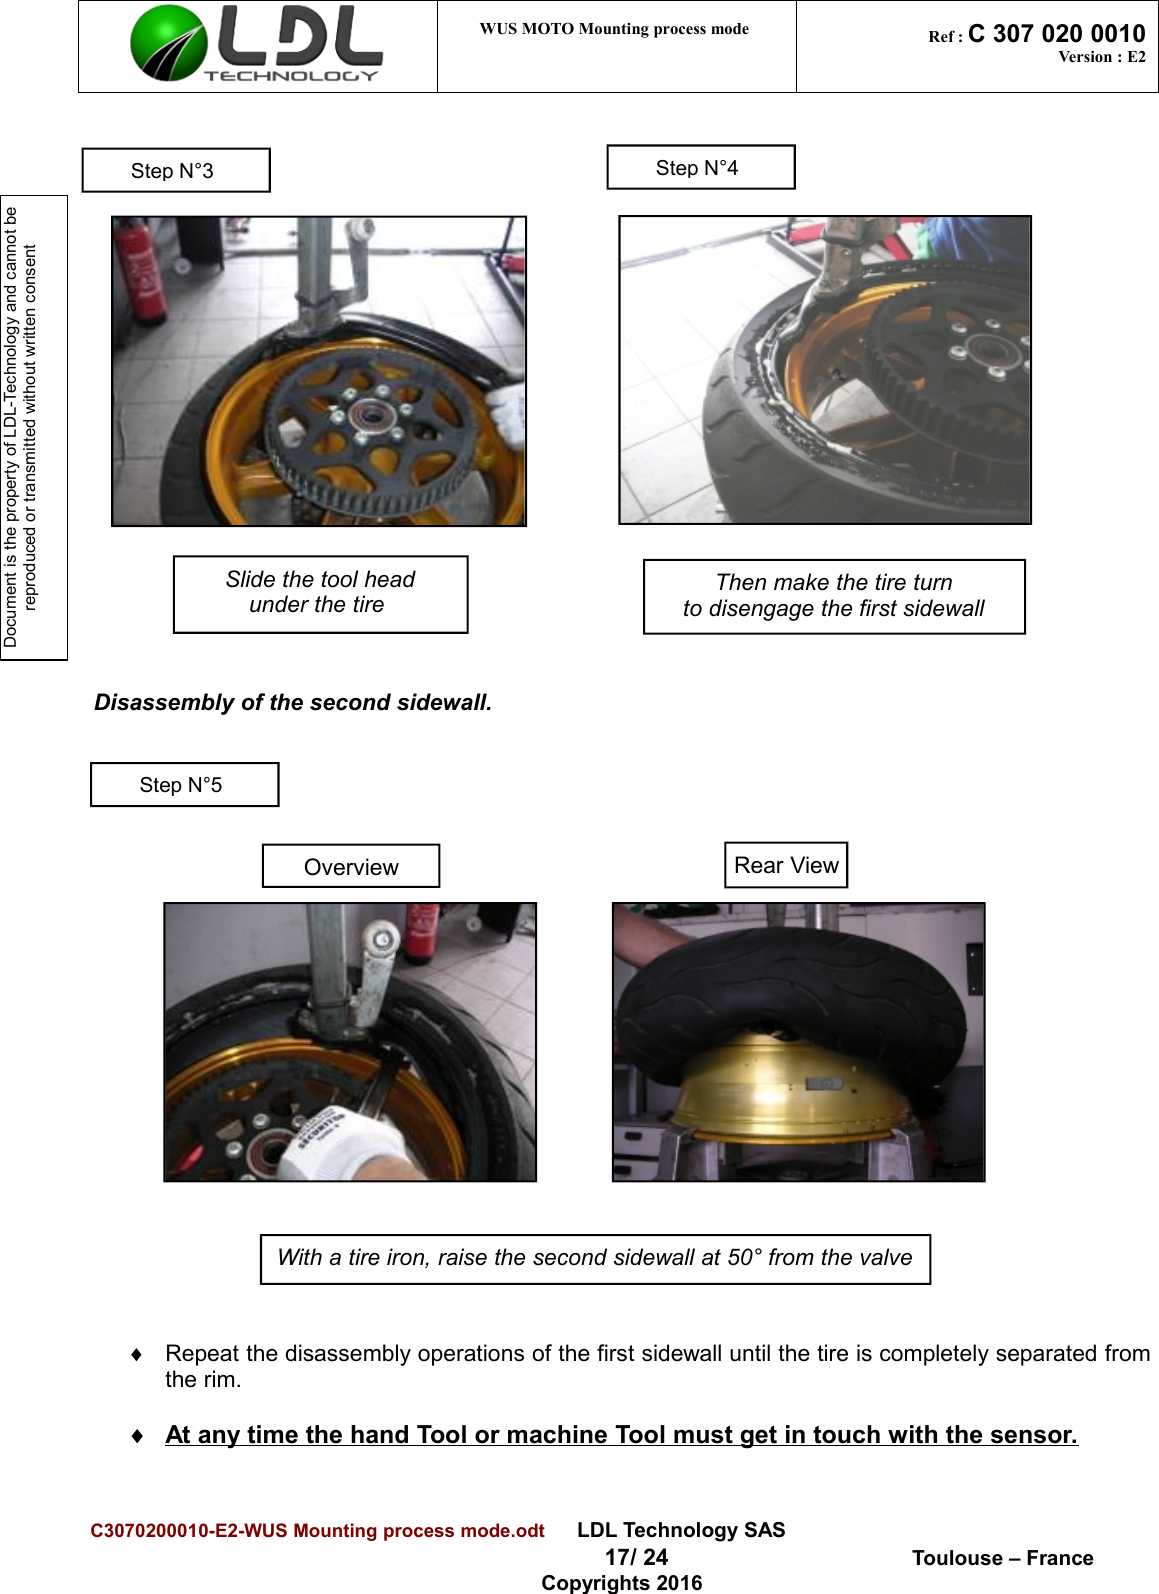 Document is the property of LDL-Technology and cannot be reproduced or transmitted without written consent WUS MOTO Mounting process mode  Ref : C 307 020 0010Version : E2Disassembly of the second sidewall.¨Repeat the disassembly operations of the first sidewall until the tire is completely separated fromthe rim.¨At any time the hand Tool or machine Tool must get in touch with the sensor.C3070200010-E2-WUS Mounting process mode.odt      LDL Technology SAS  17/ 24  Toulouse – FranceCopyrights 2016Slide the tool headunder the tire With a tire iron, raise the second sidewall at 50° from the valveOverviewRear ViewStep N°4Step N°5Step N°3Then make the tire turnto disengage the first sidewall